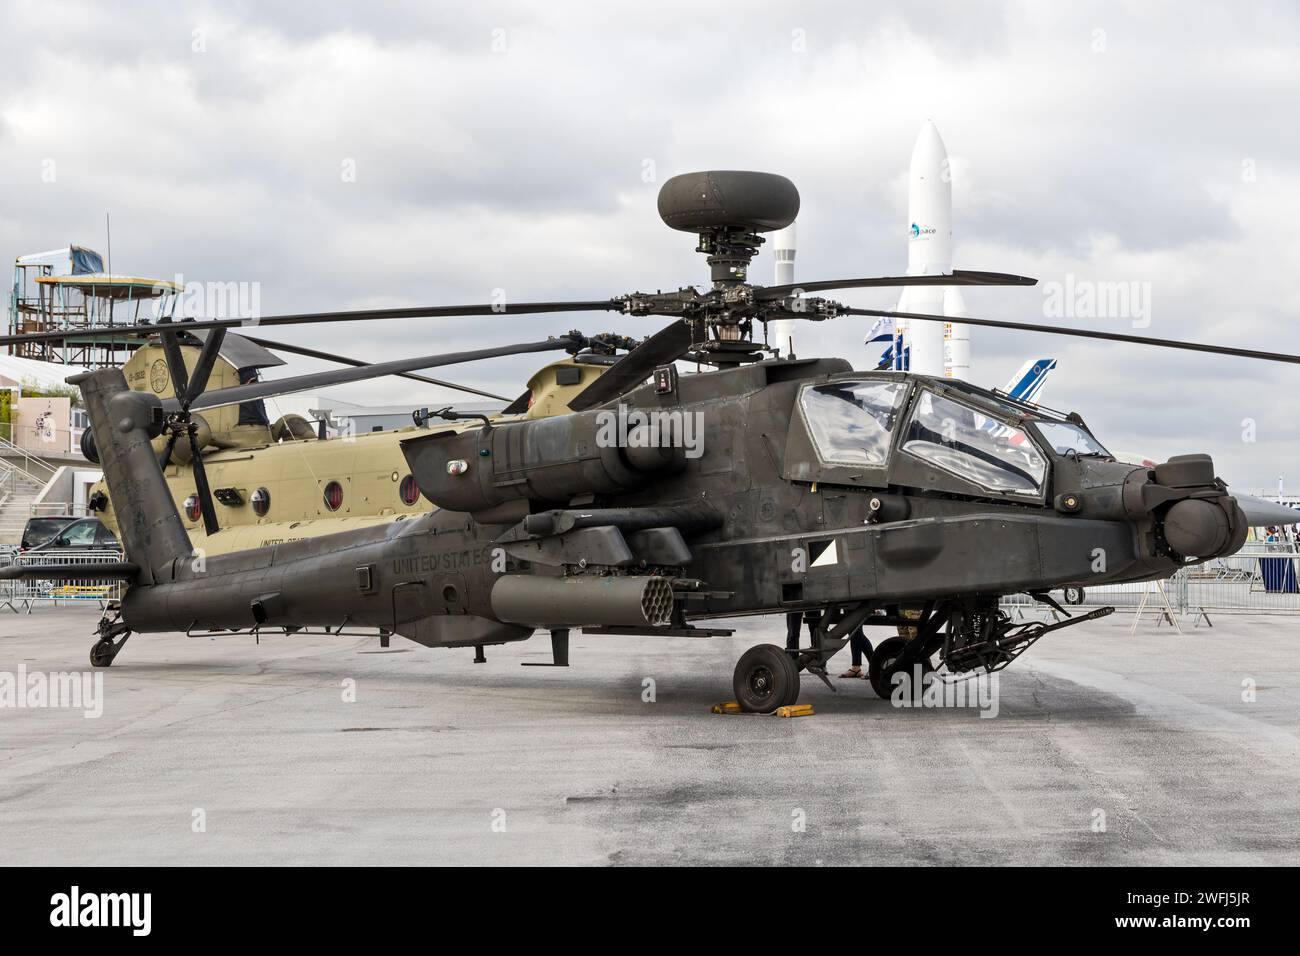 US Army Boeing AH-64D Apache Longbow attack helicopter at the Paris Air Show. Le Bourget, France - June 23, 2017 Stock Photo